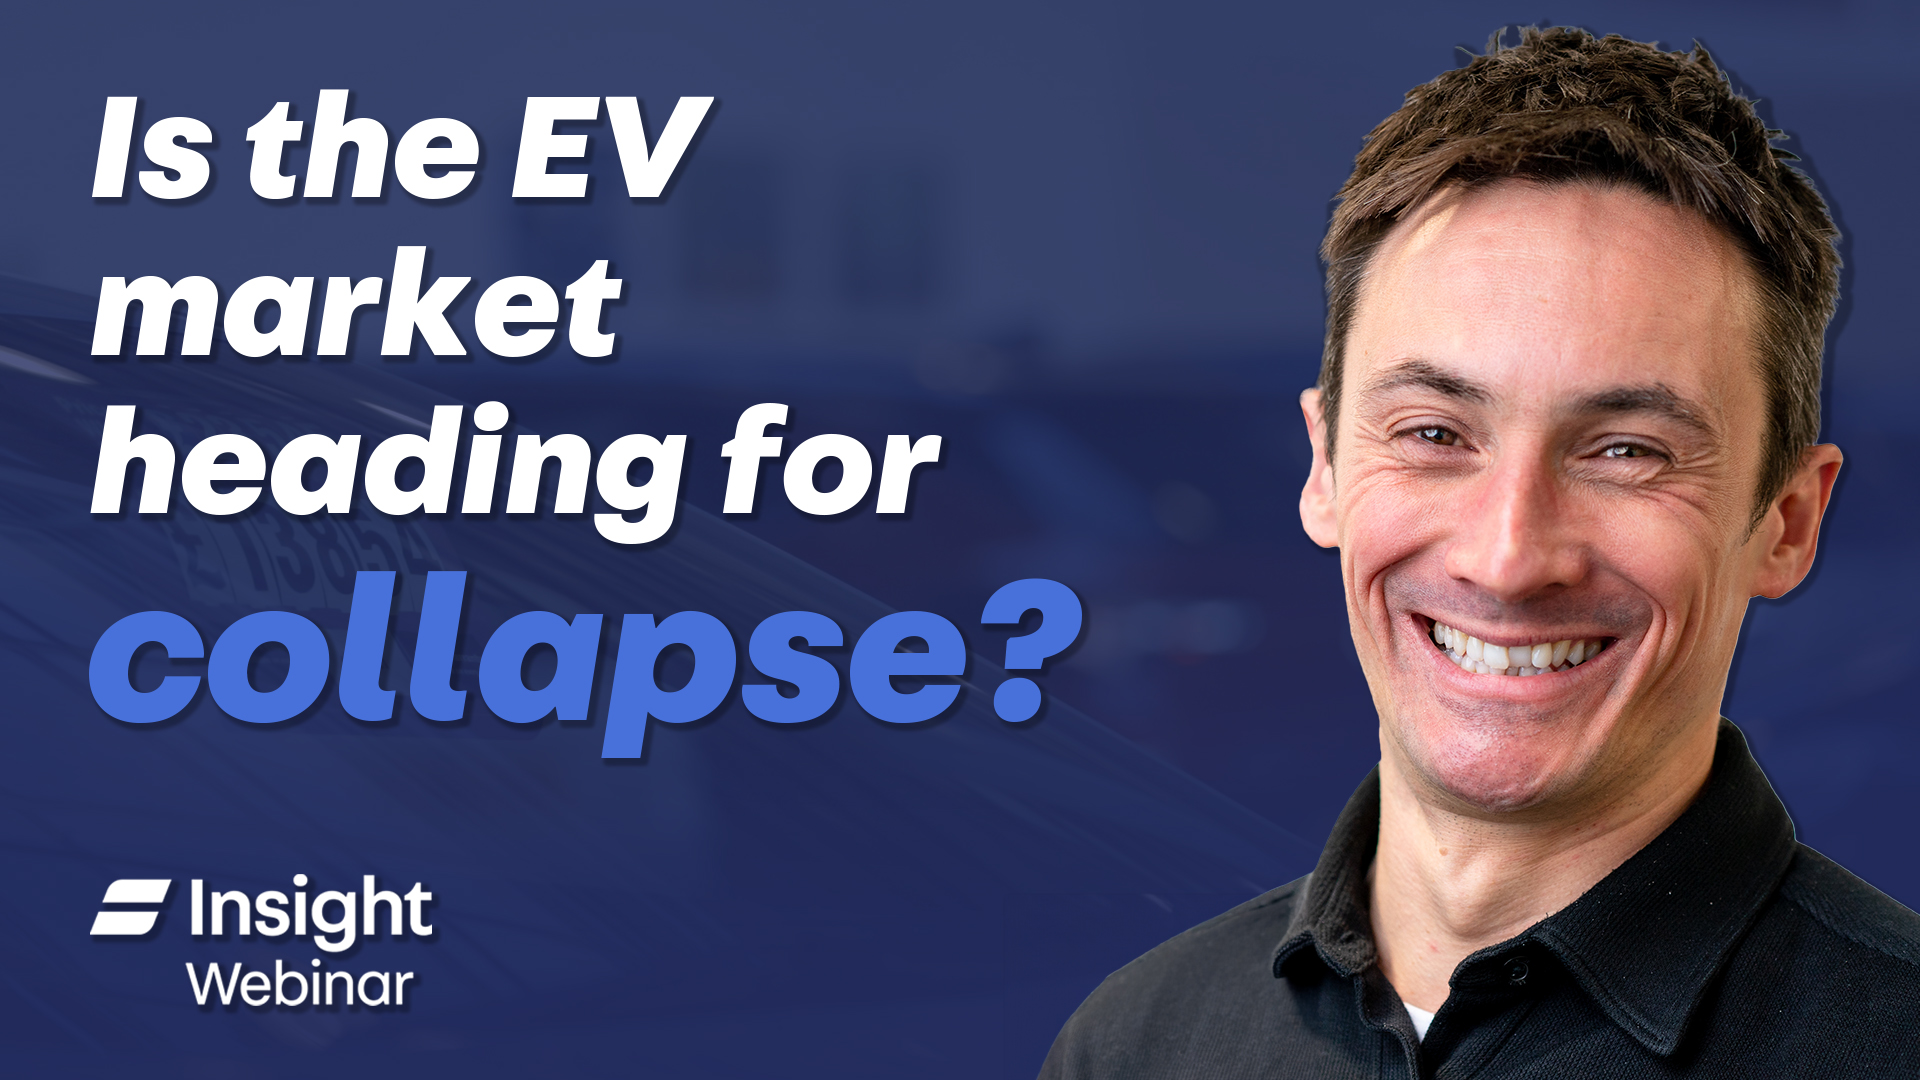 Is the EV market heading for collapse?